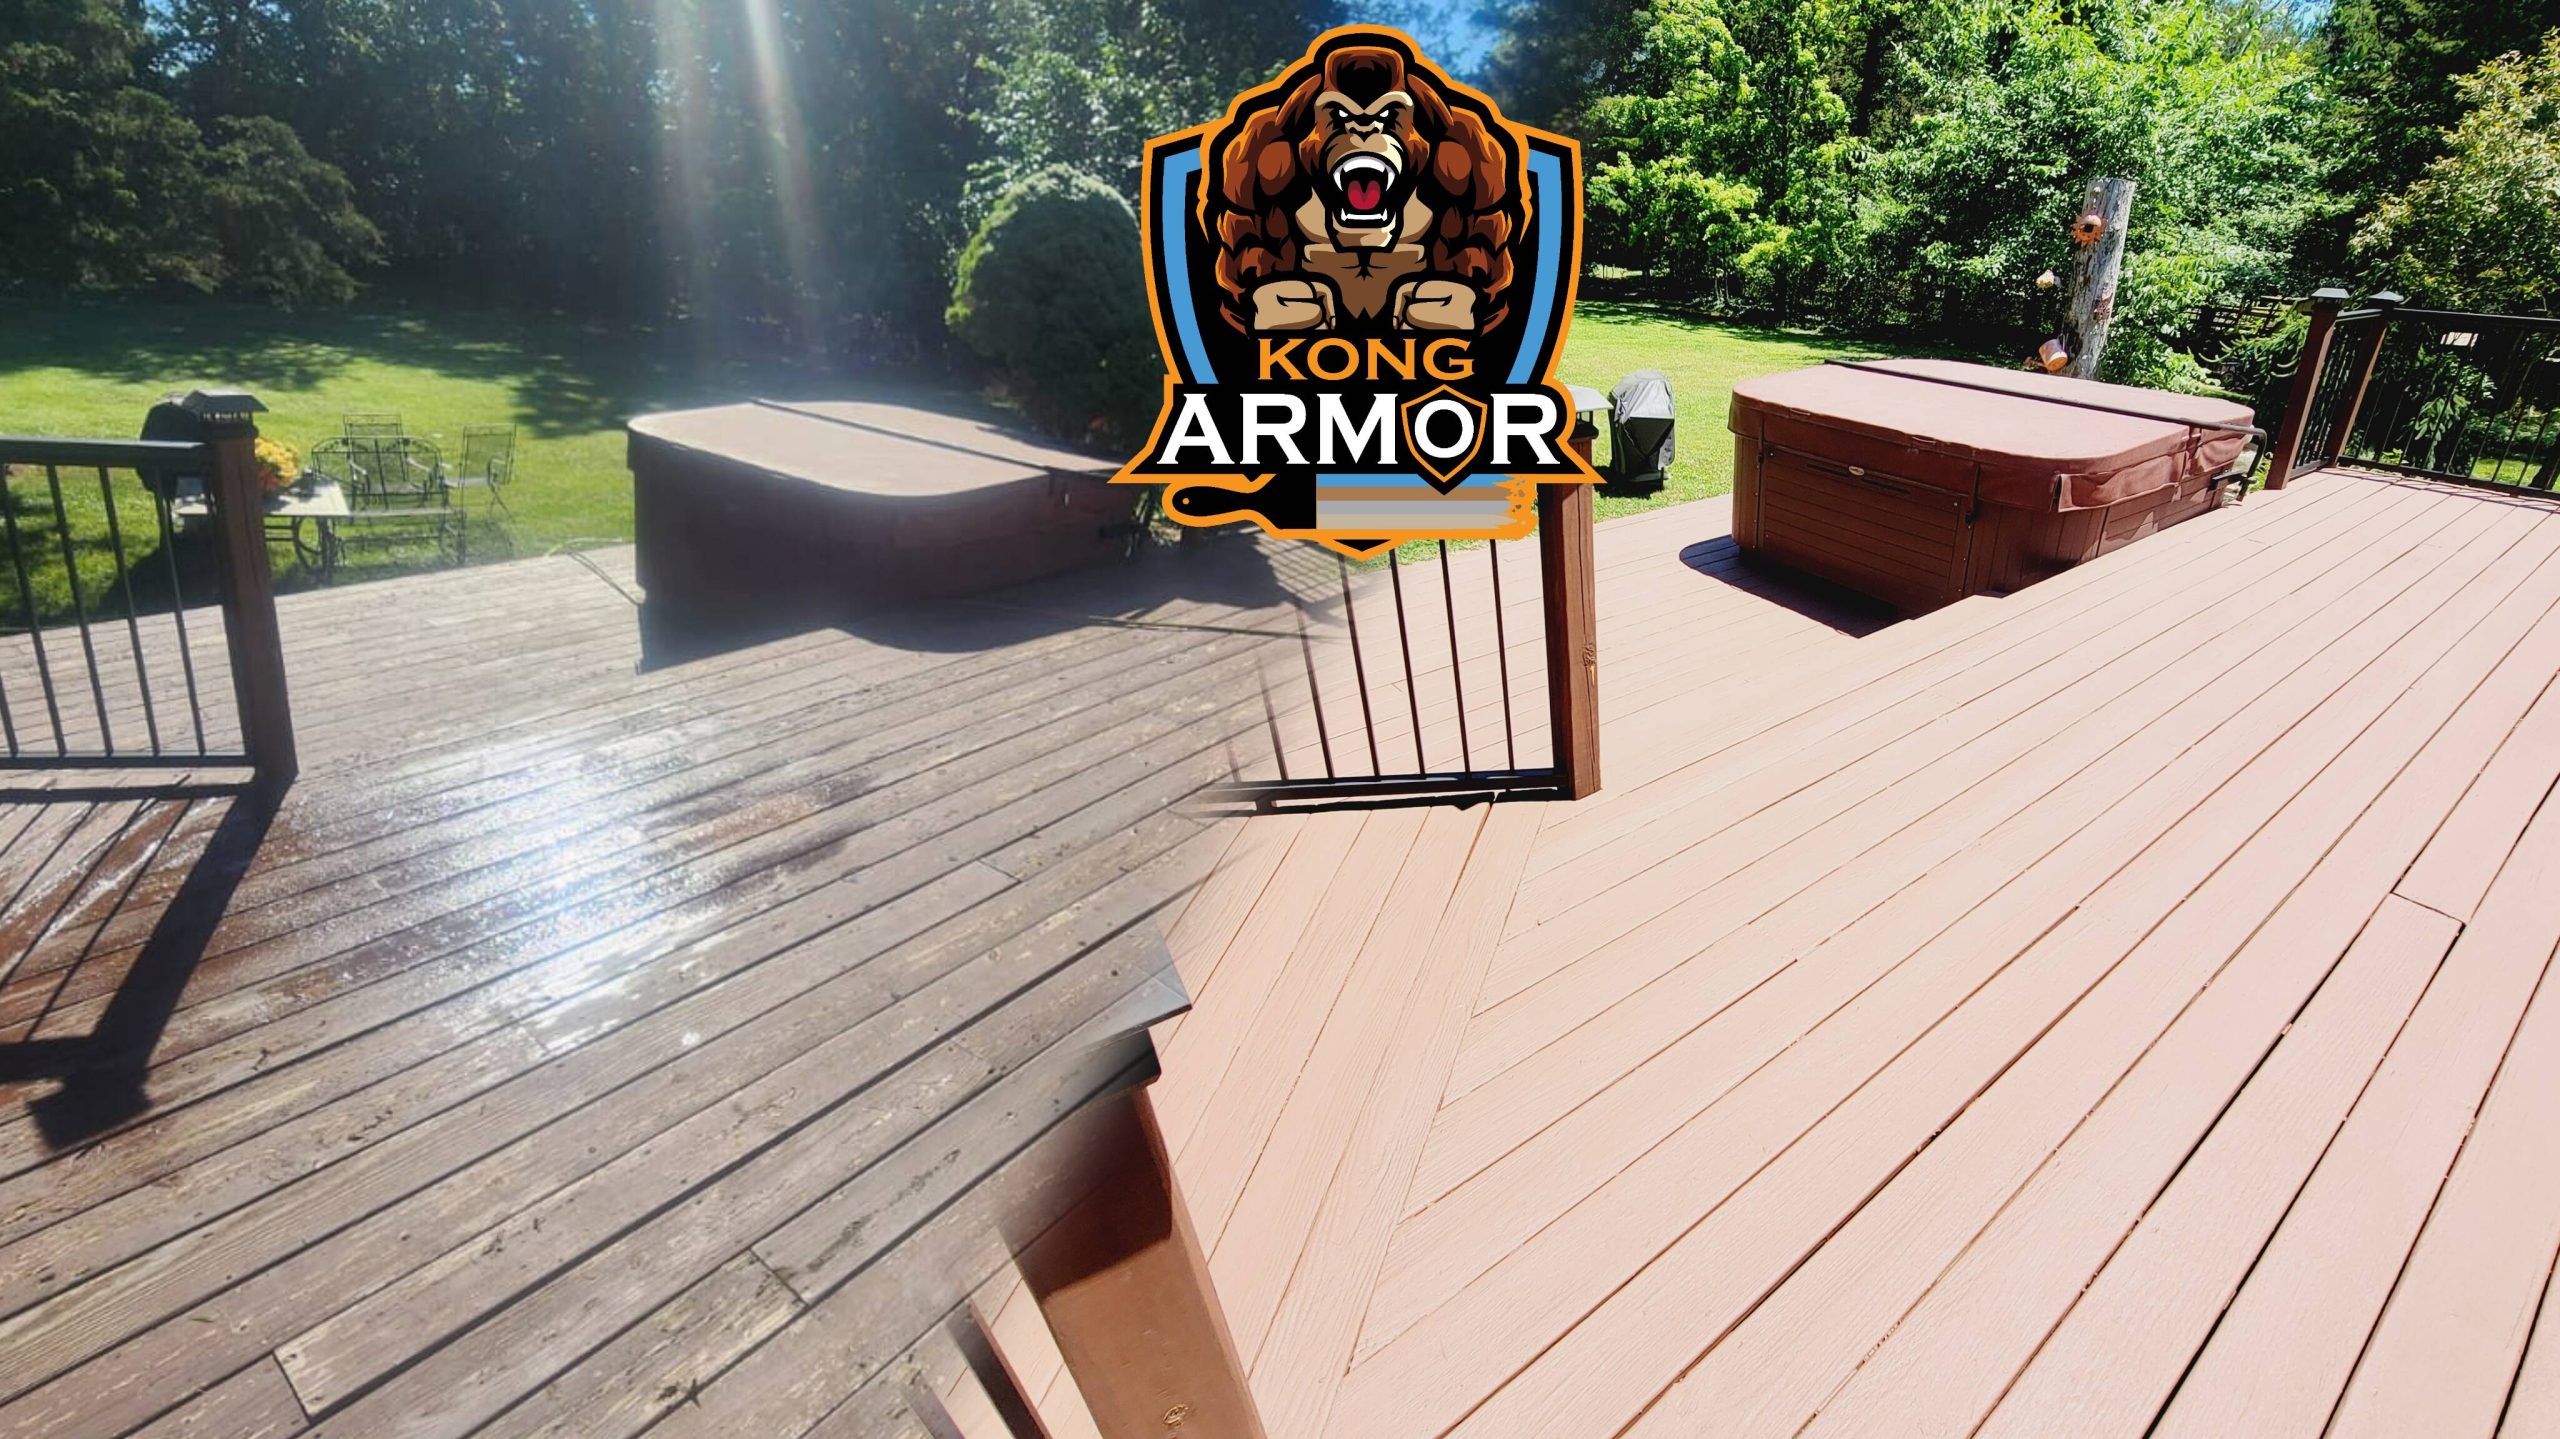 image displays a before and after of a deck that previously had peeling flaking stain in dark brown and it was dirty pictured on the left, afterwards its all cleaned up and has afresh new surface and a beautiful bright brown coating that seems to have encapsualted the old one pictured one the left.